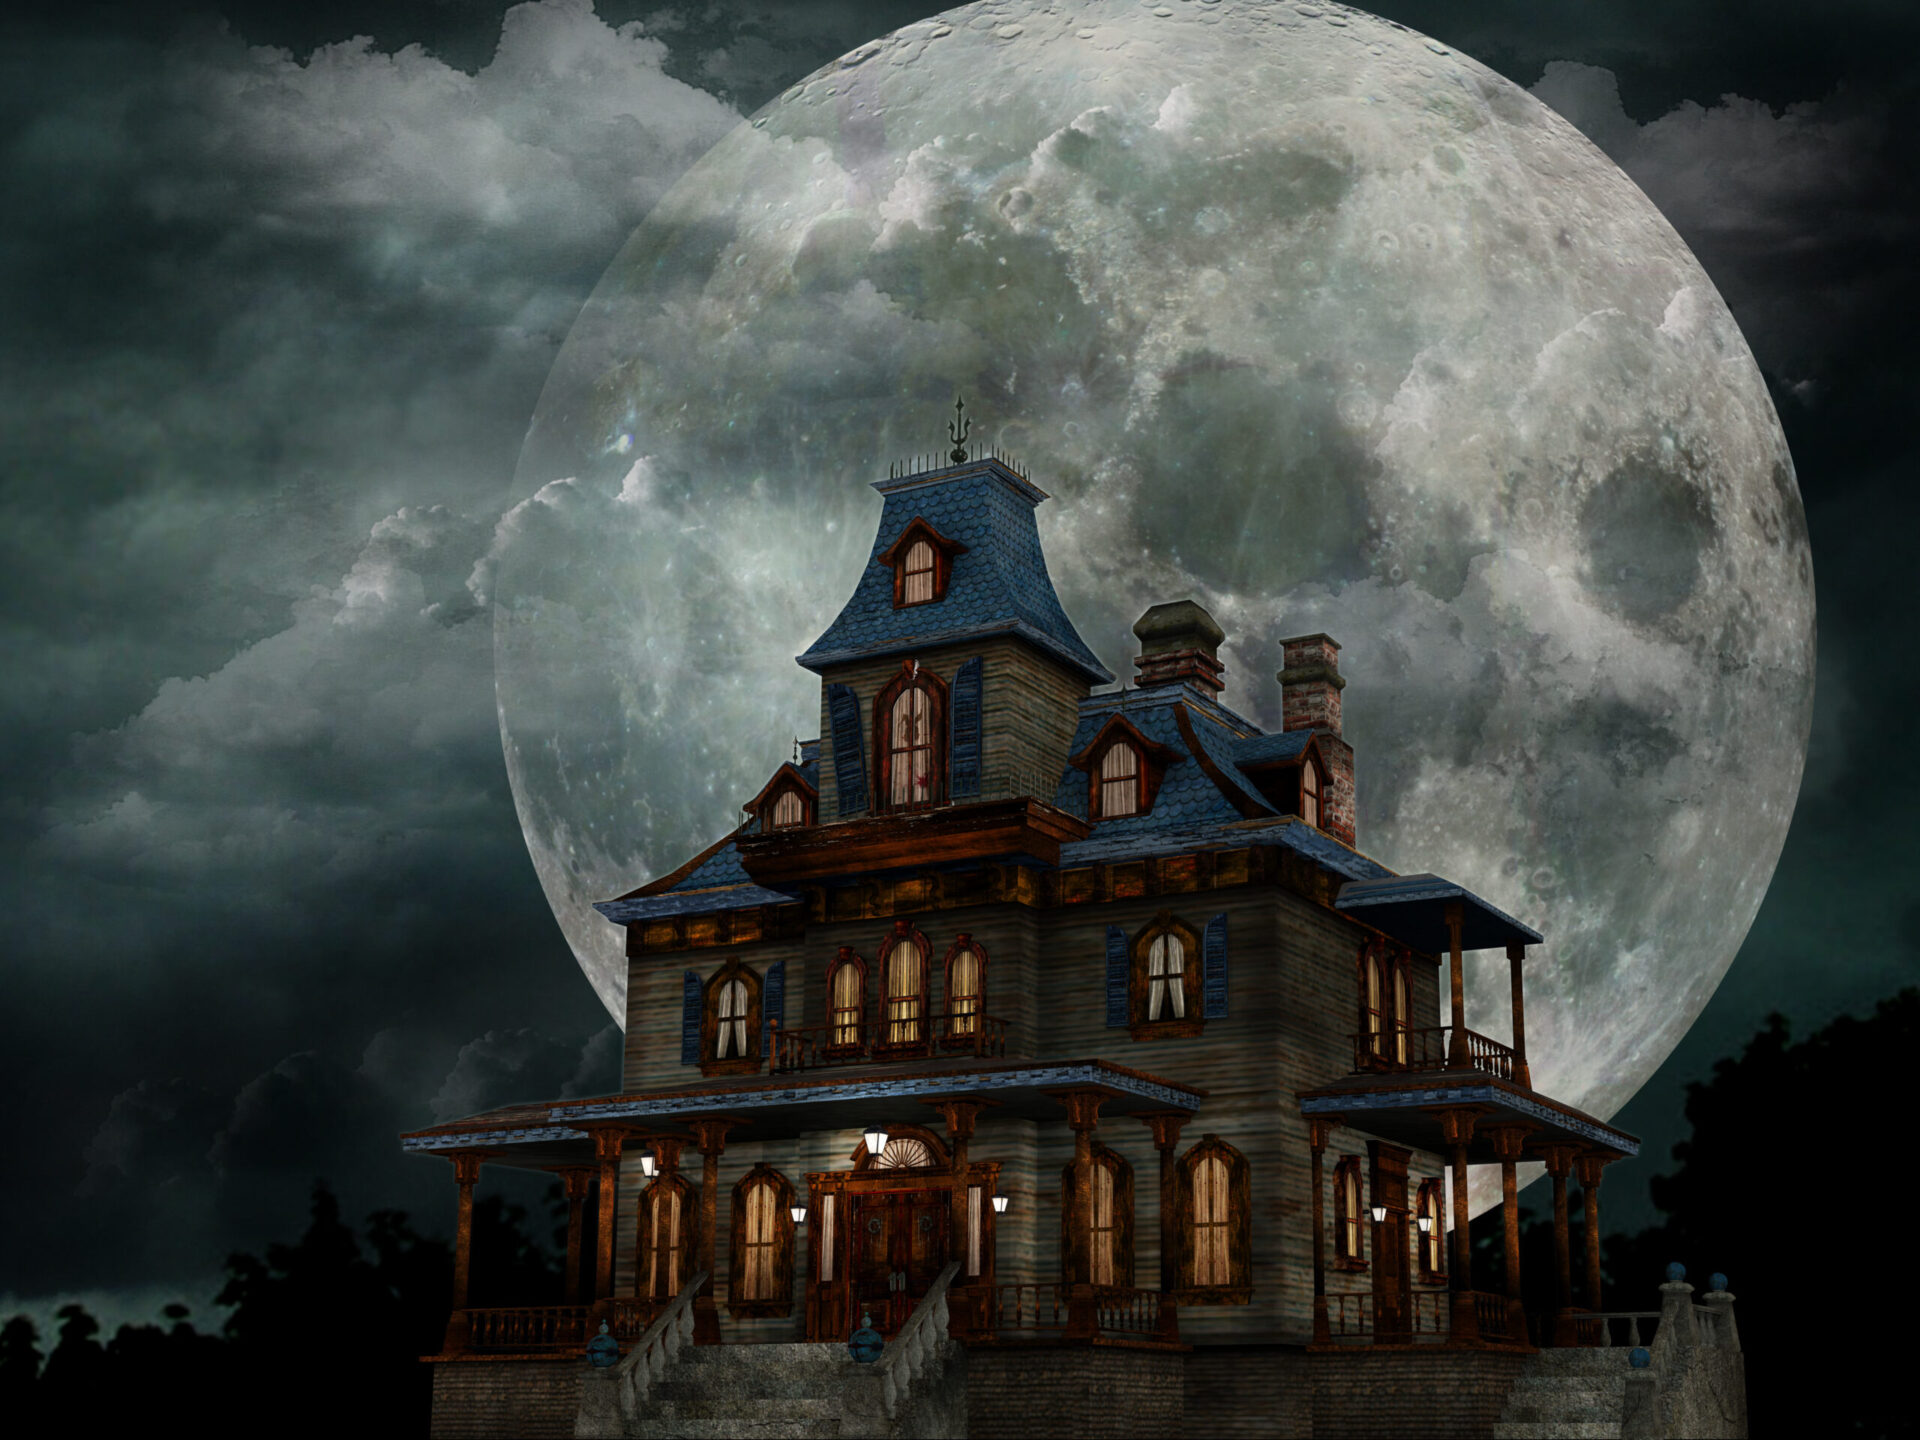 Americans Would Buy A Haunted Home To Save Money Despite Fears